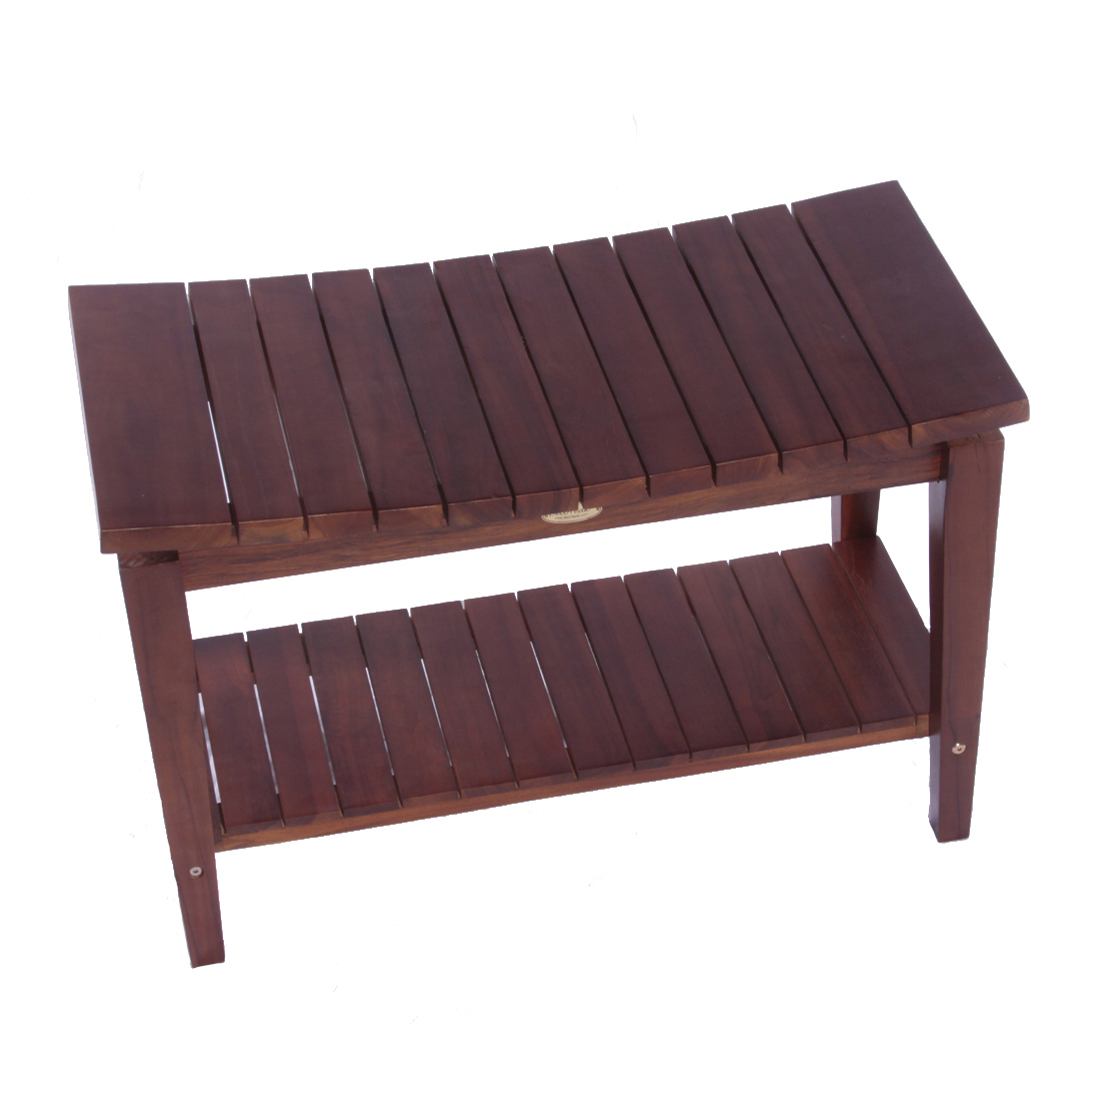 DT139 30" Teak Shower Bench with Shelf - Click Image to Close